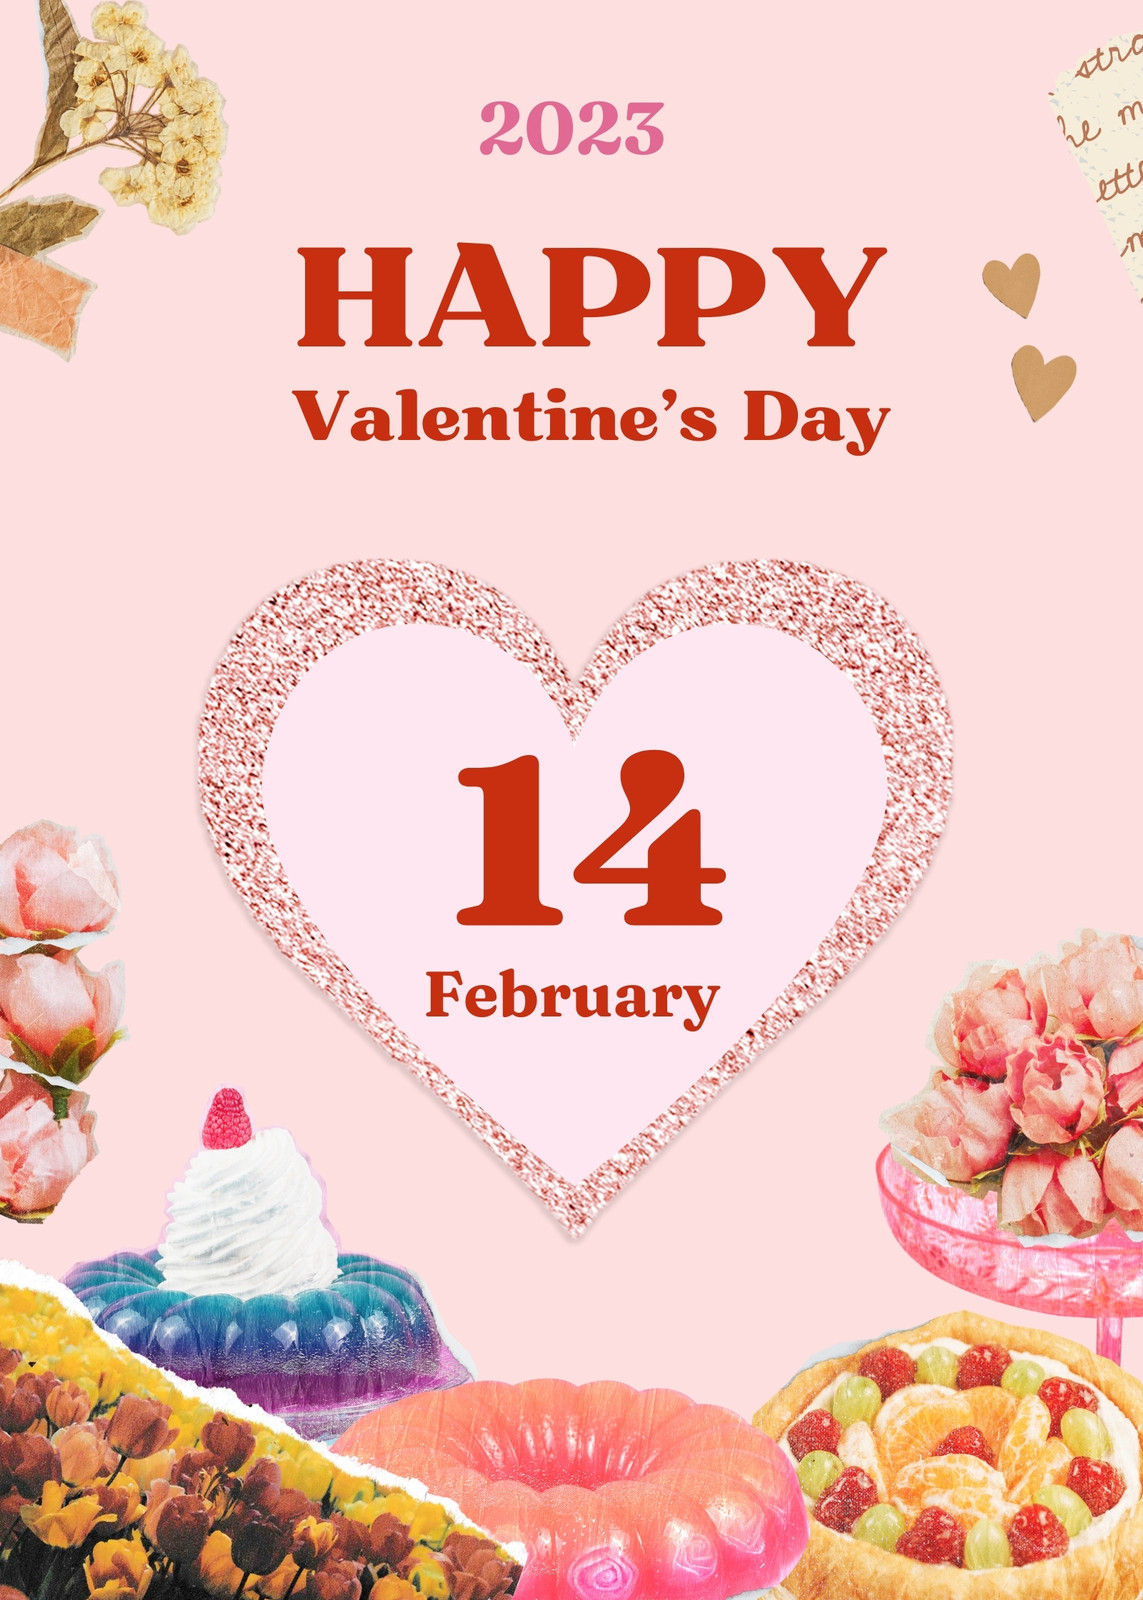 Happy Valentine's Day 2023: Wishes, Quotes & Messages You Can Send